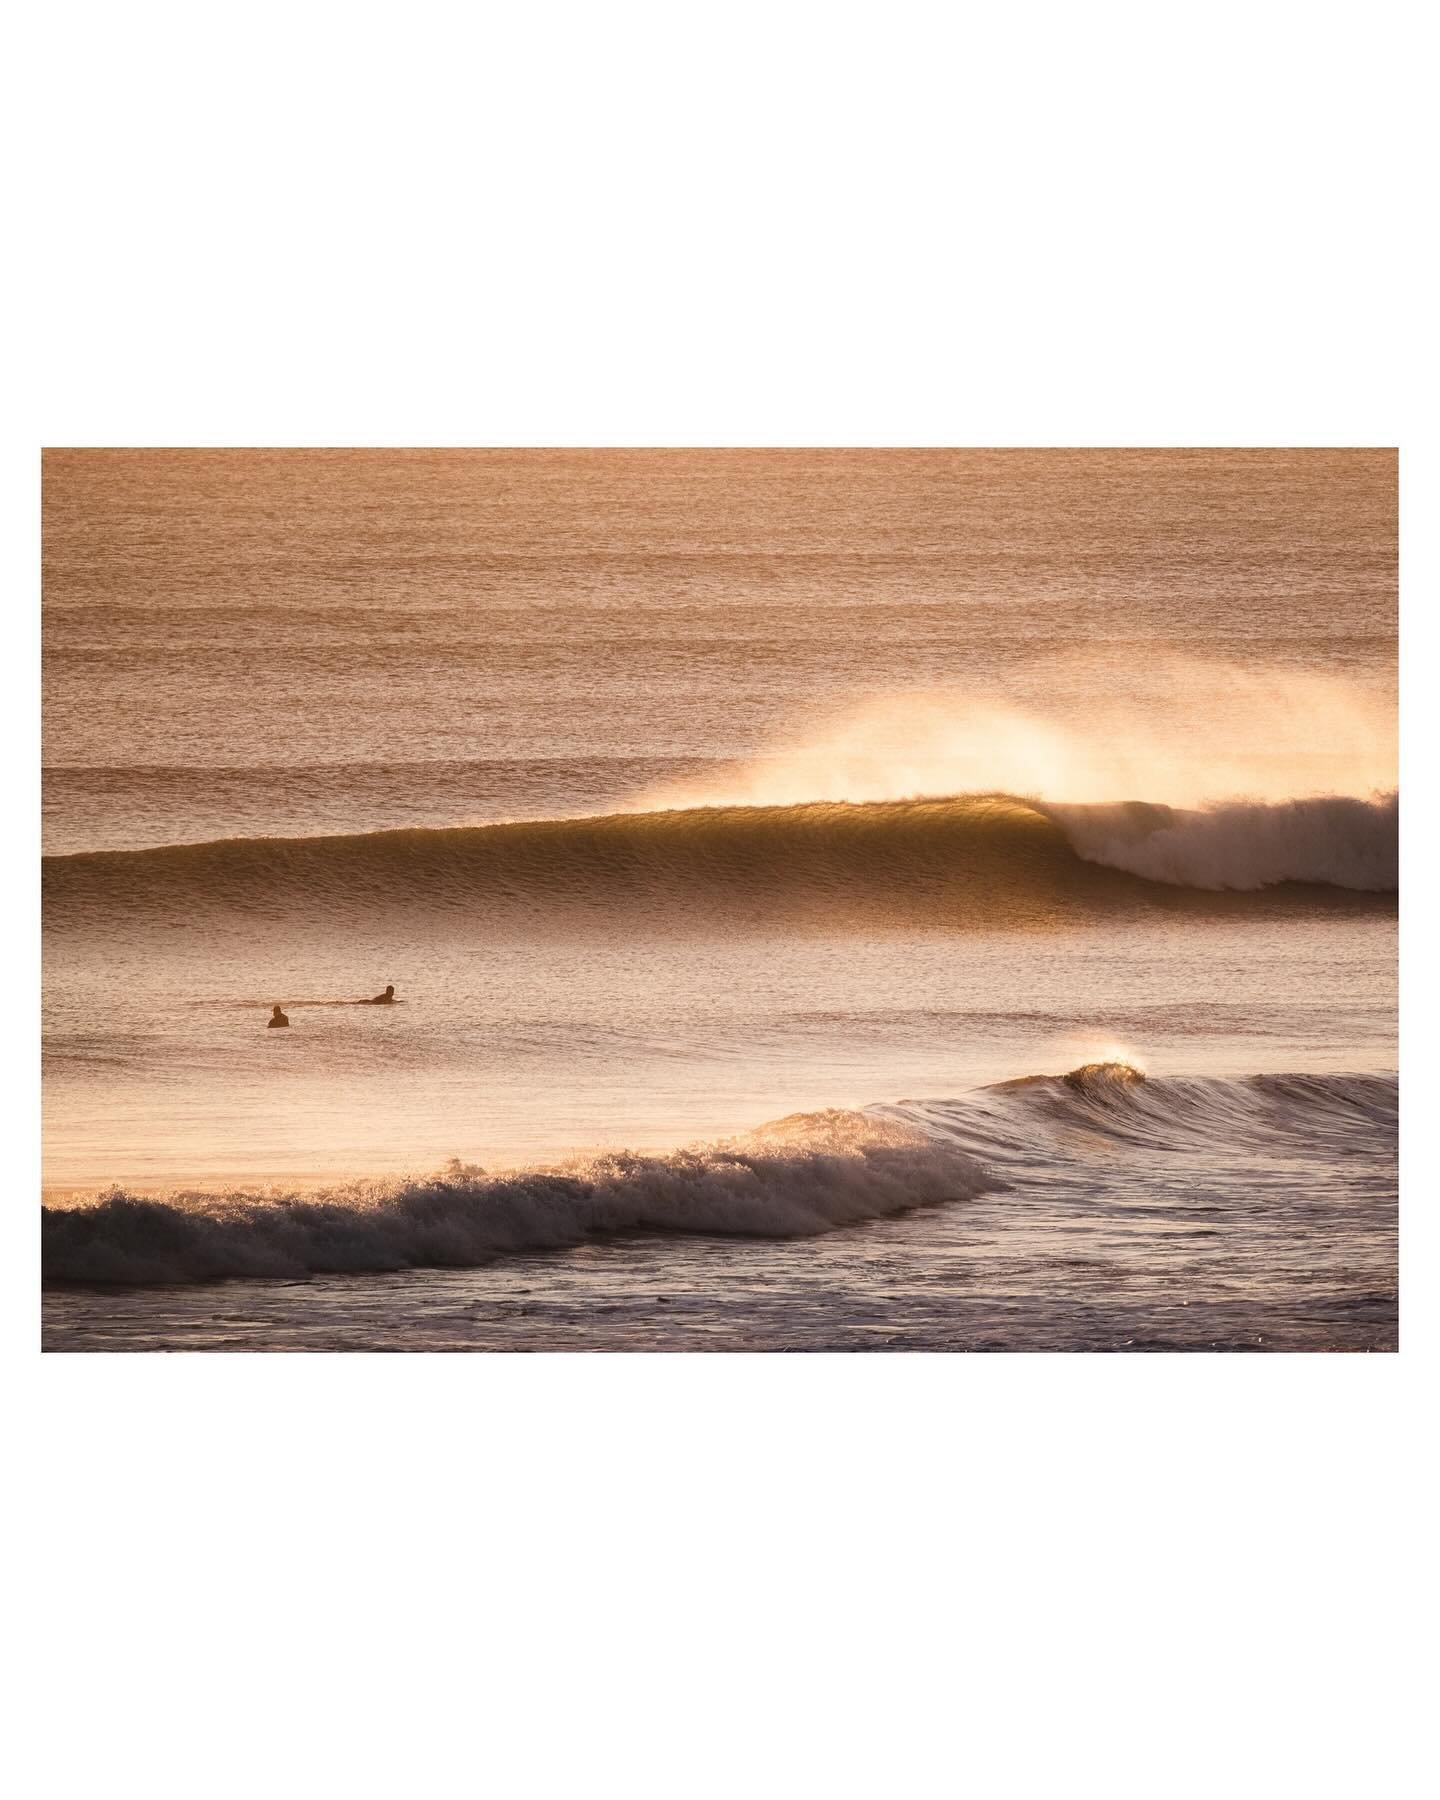 Feeling autumnal 🍂 

Couple fun ones from this time last week when we had a good run of swell paired with a cloudless sky.

#sunrisephotography #outeastnz #eastcoastnz #surfline #surflinesessions #surflinenewzealand #surfphotos #femalesurfphotograph